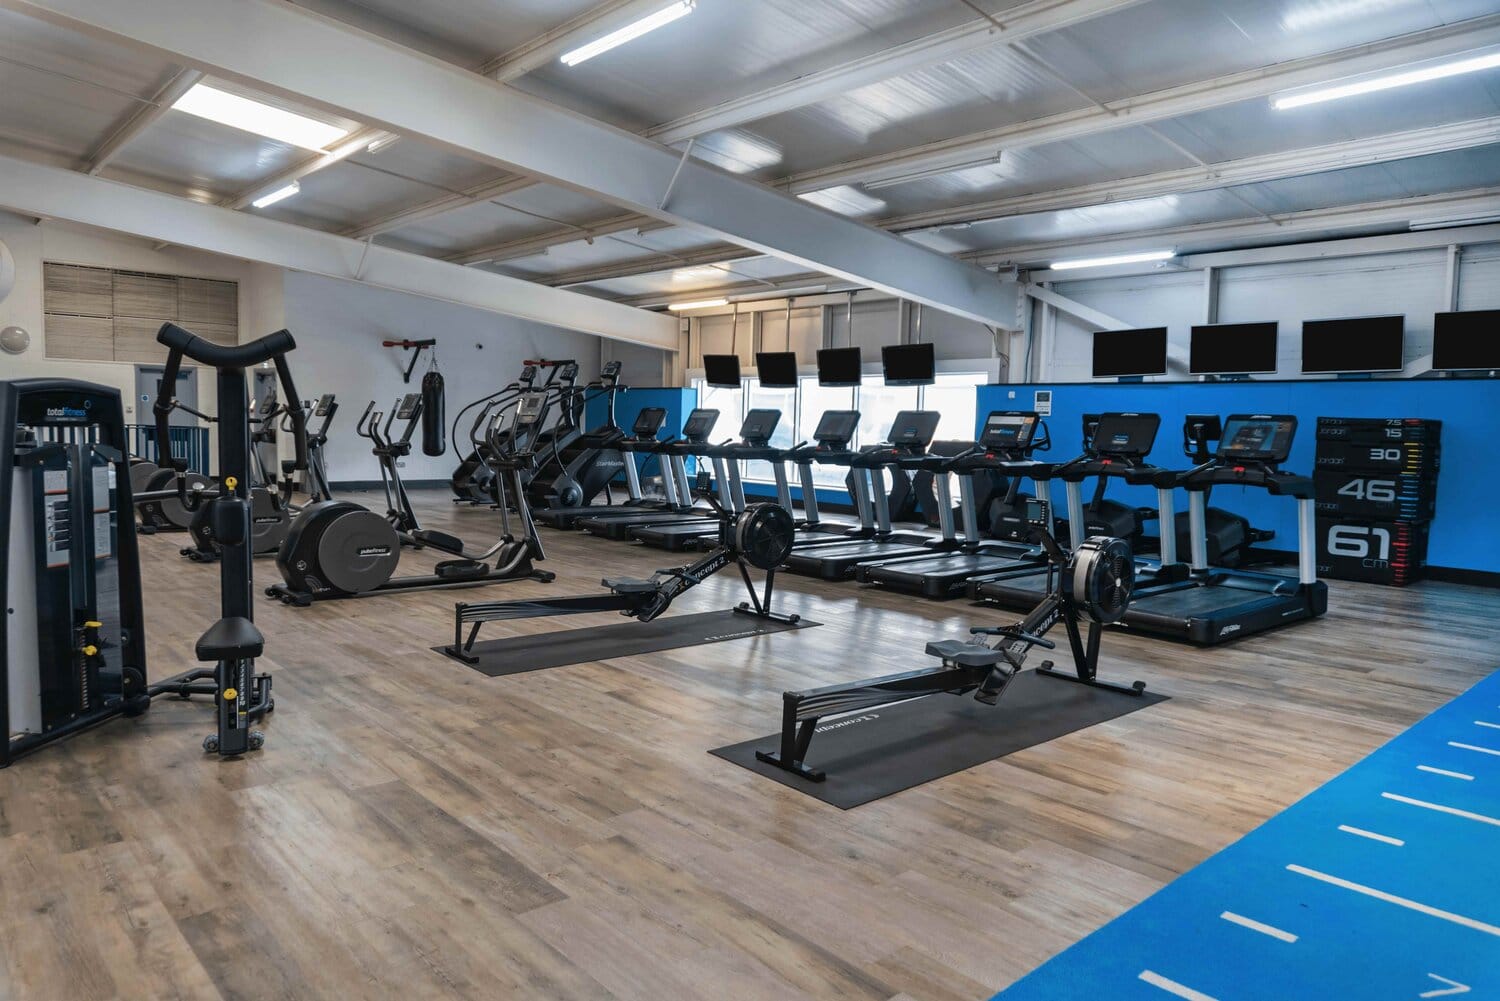 total fitness gym equipment